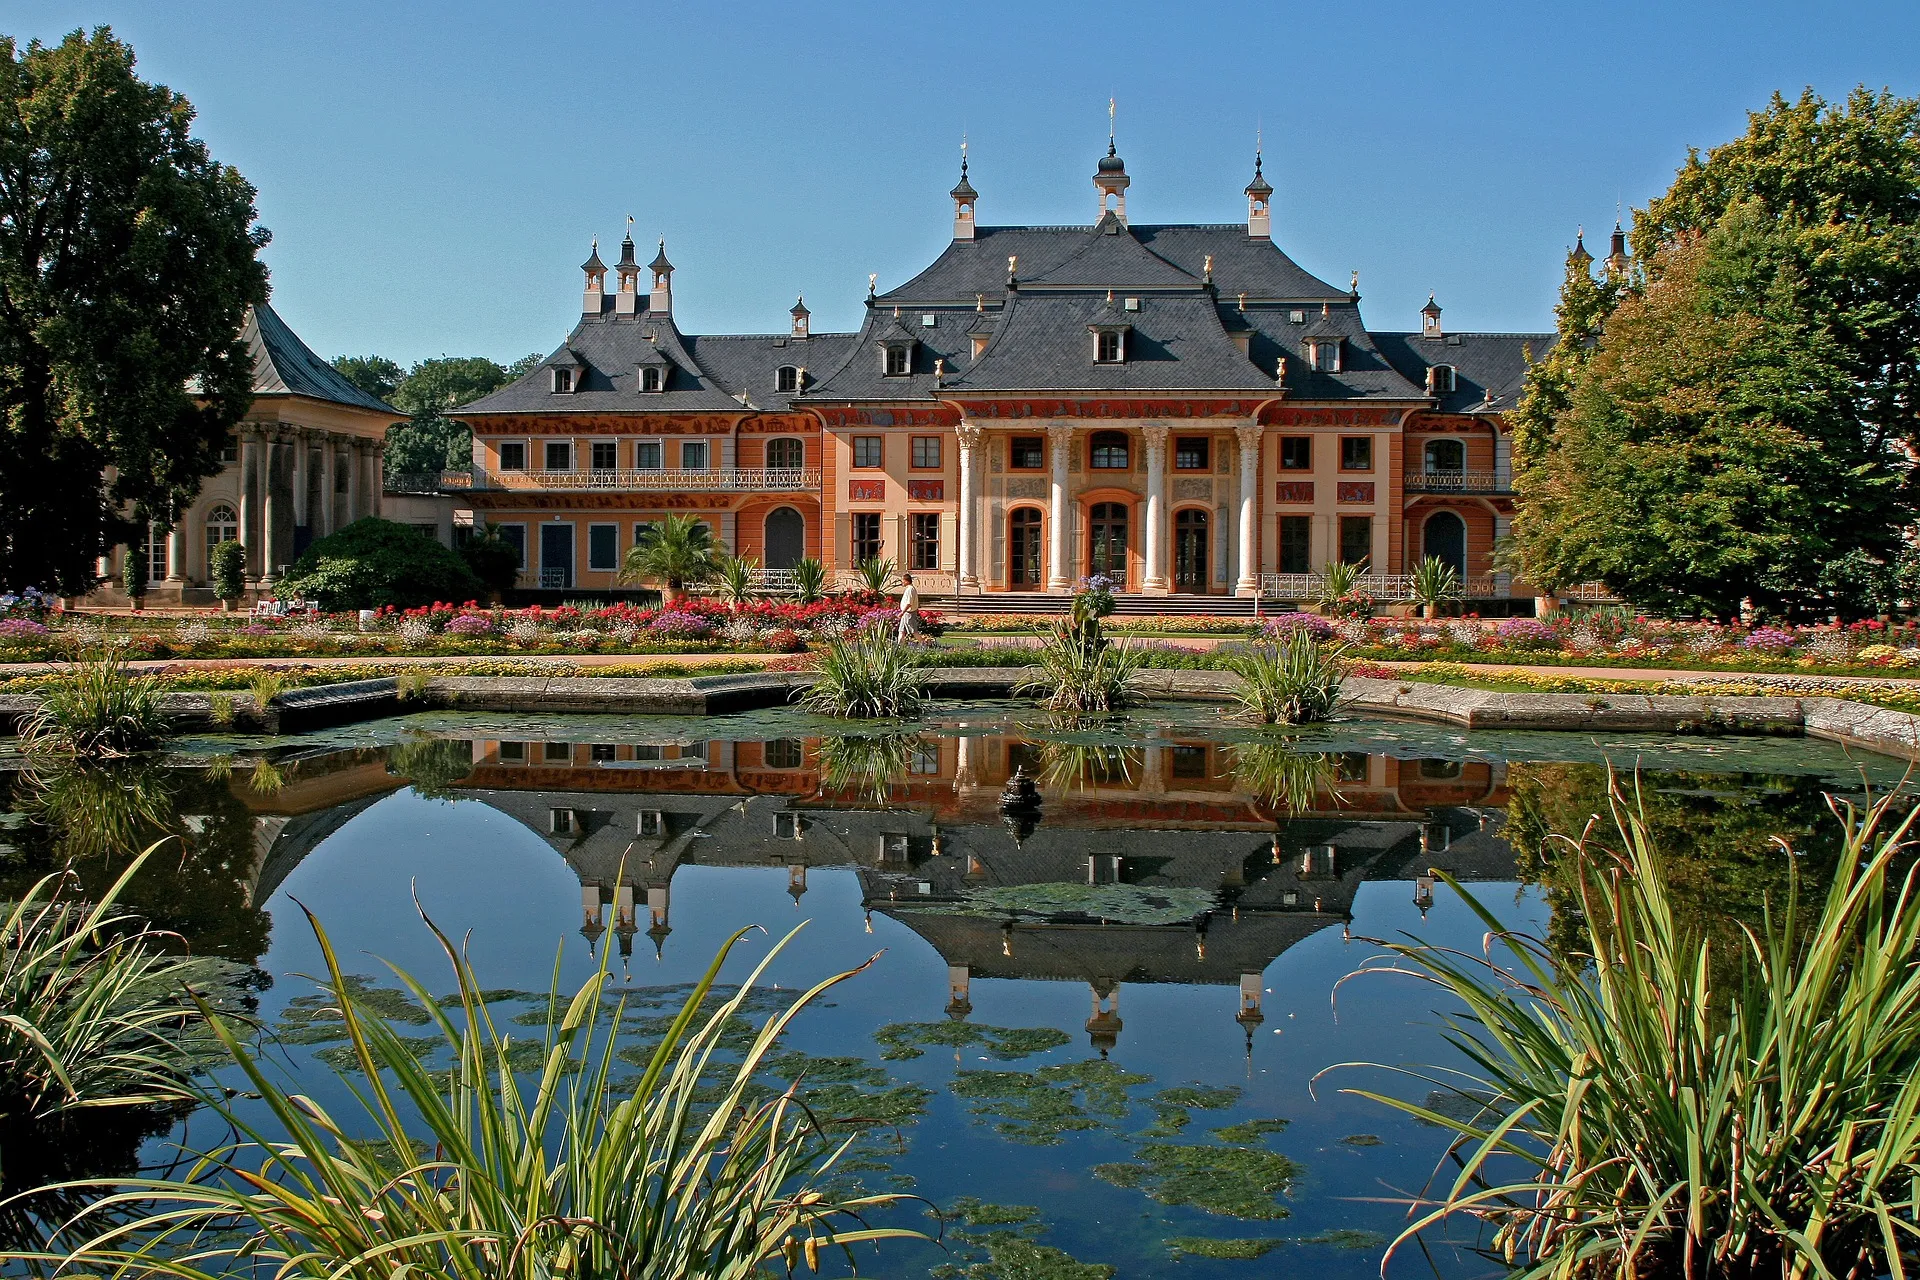 Pillnitz Castle in the southern outskirts of Dresden.